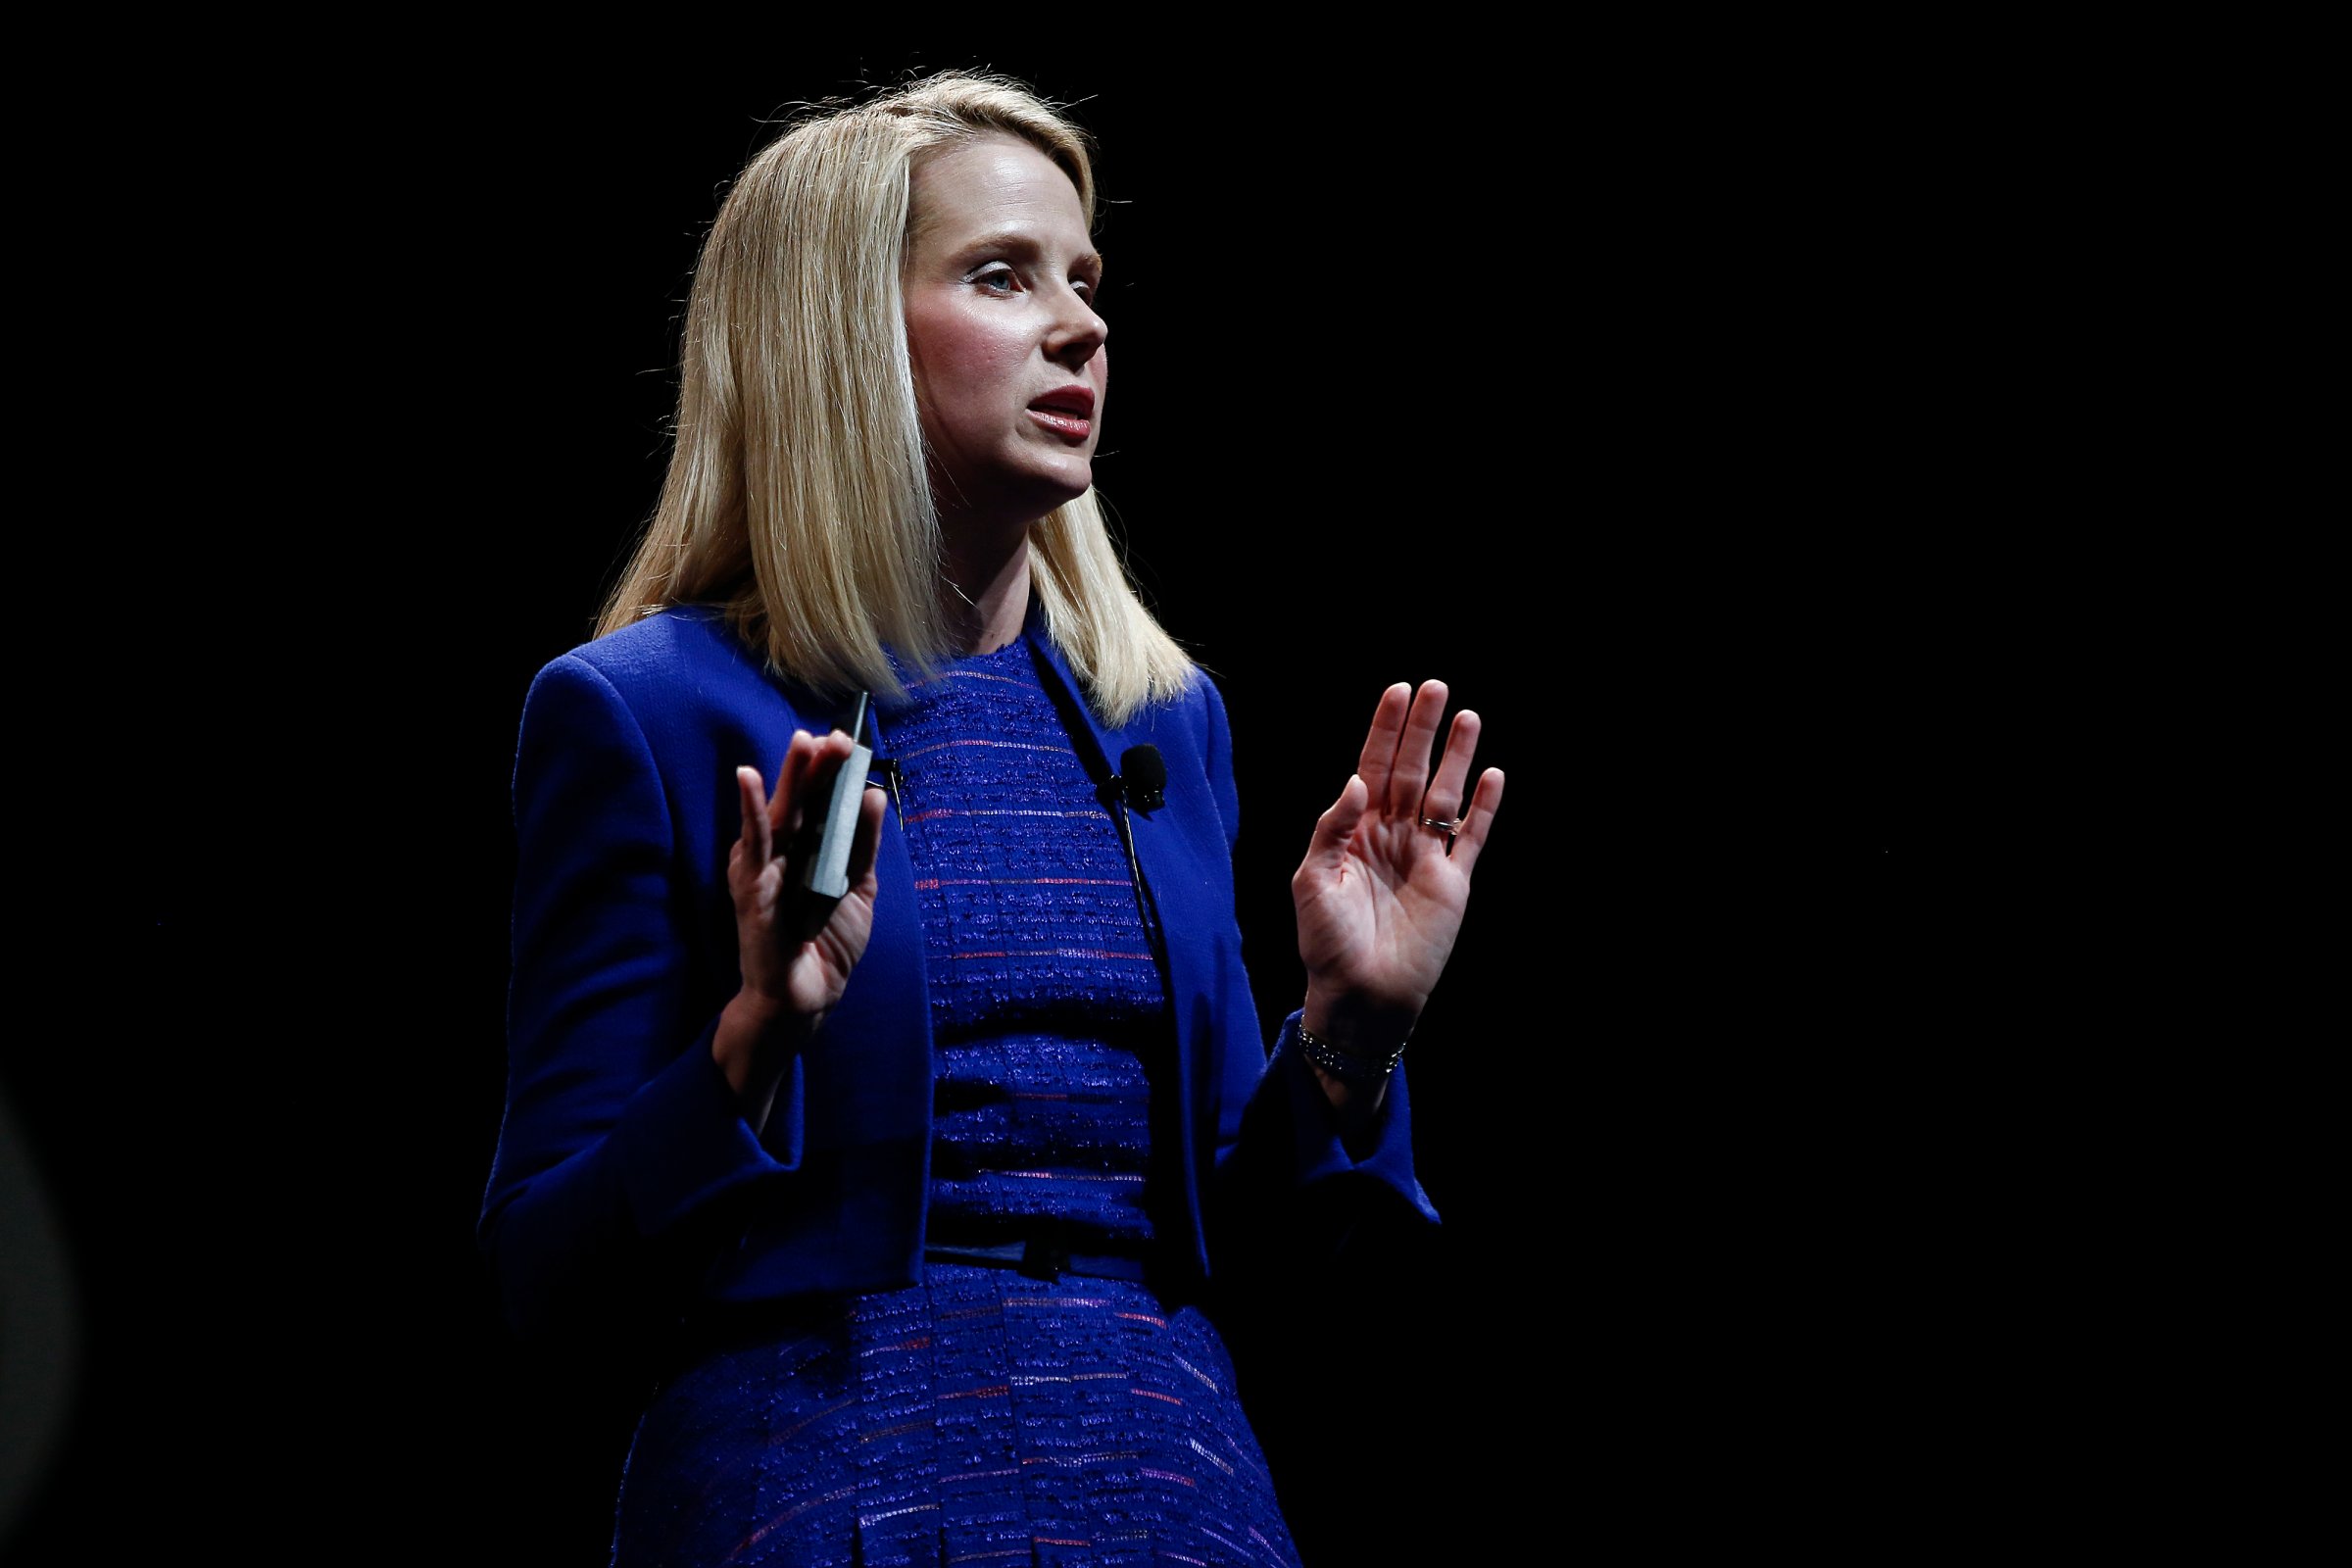 Chief Executive Officer Of Yahoo! Inc. Marissa Mayer Joins Key Speakers At Cannes Lions International Festival Of Creativity